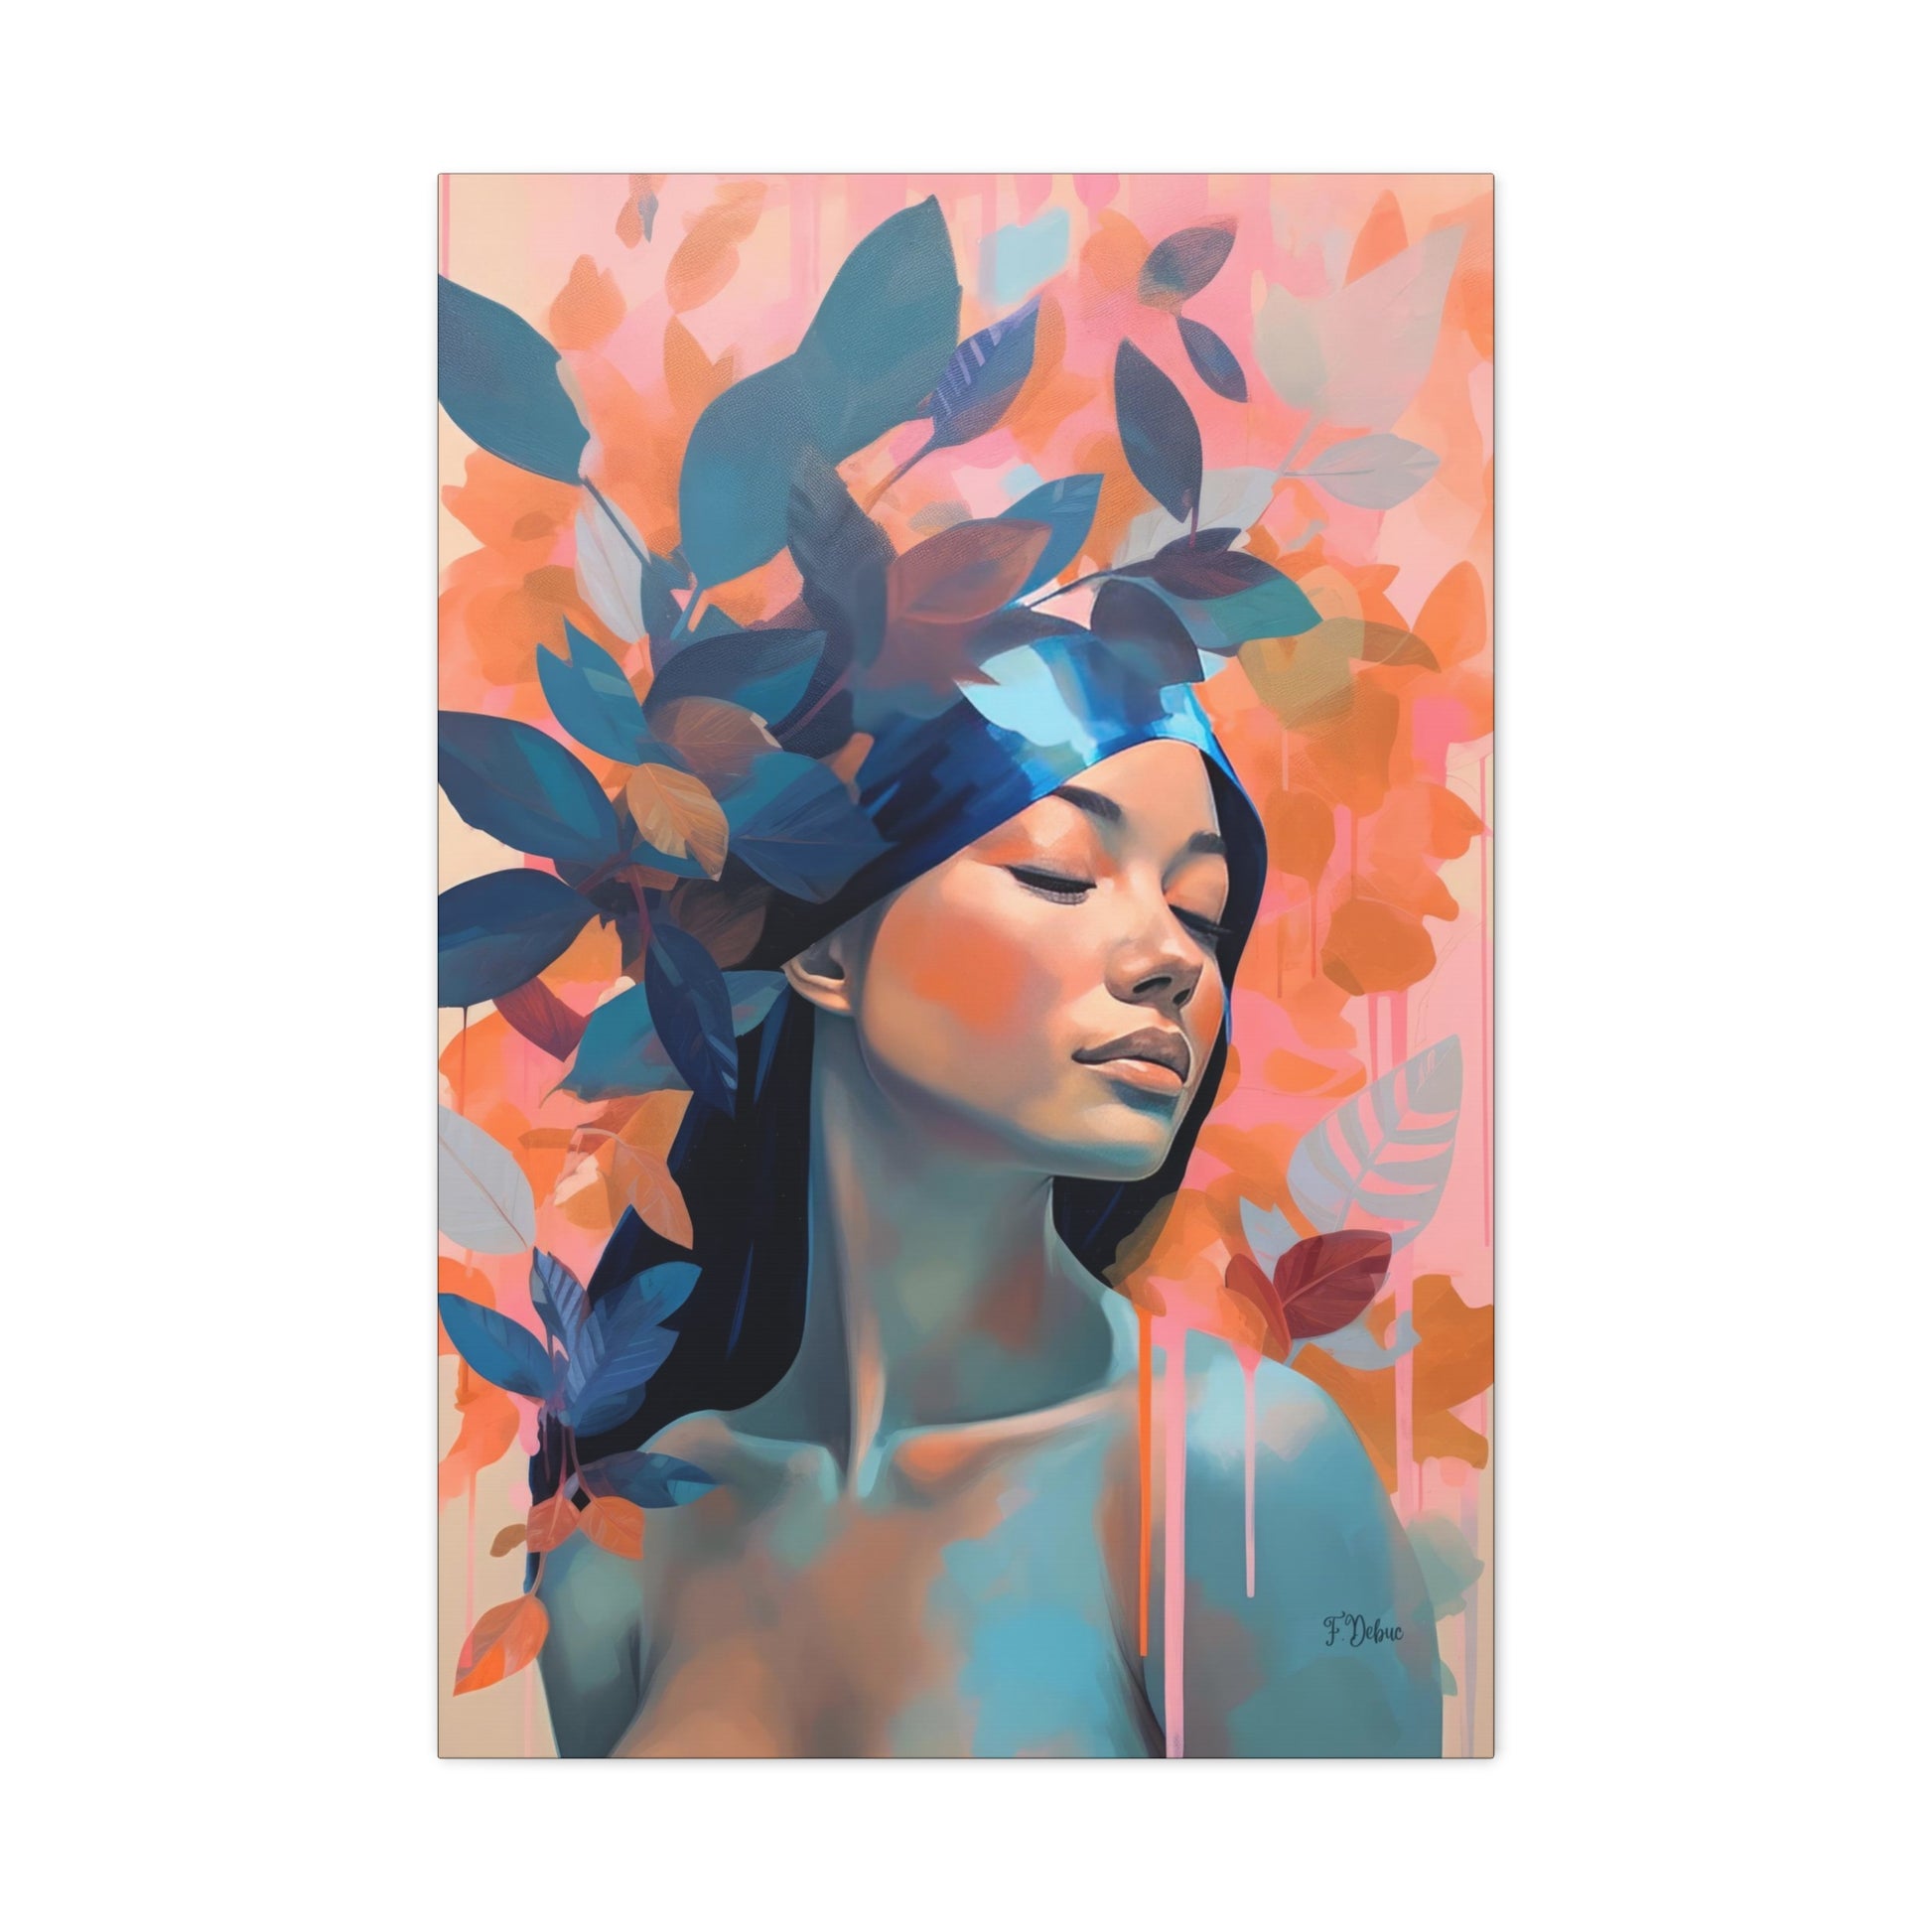 Our fine art wall print features a graceful woman with artistic leaves, capturing elegance in a minimalistic palette.